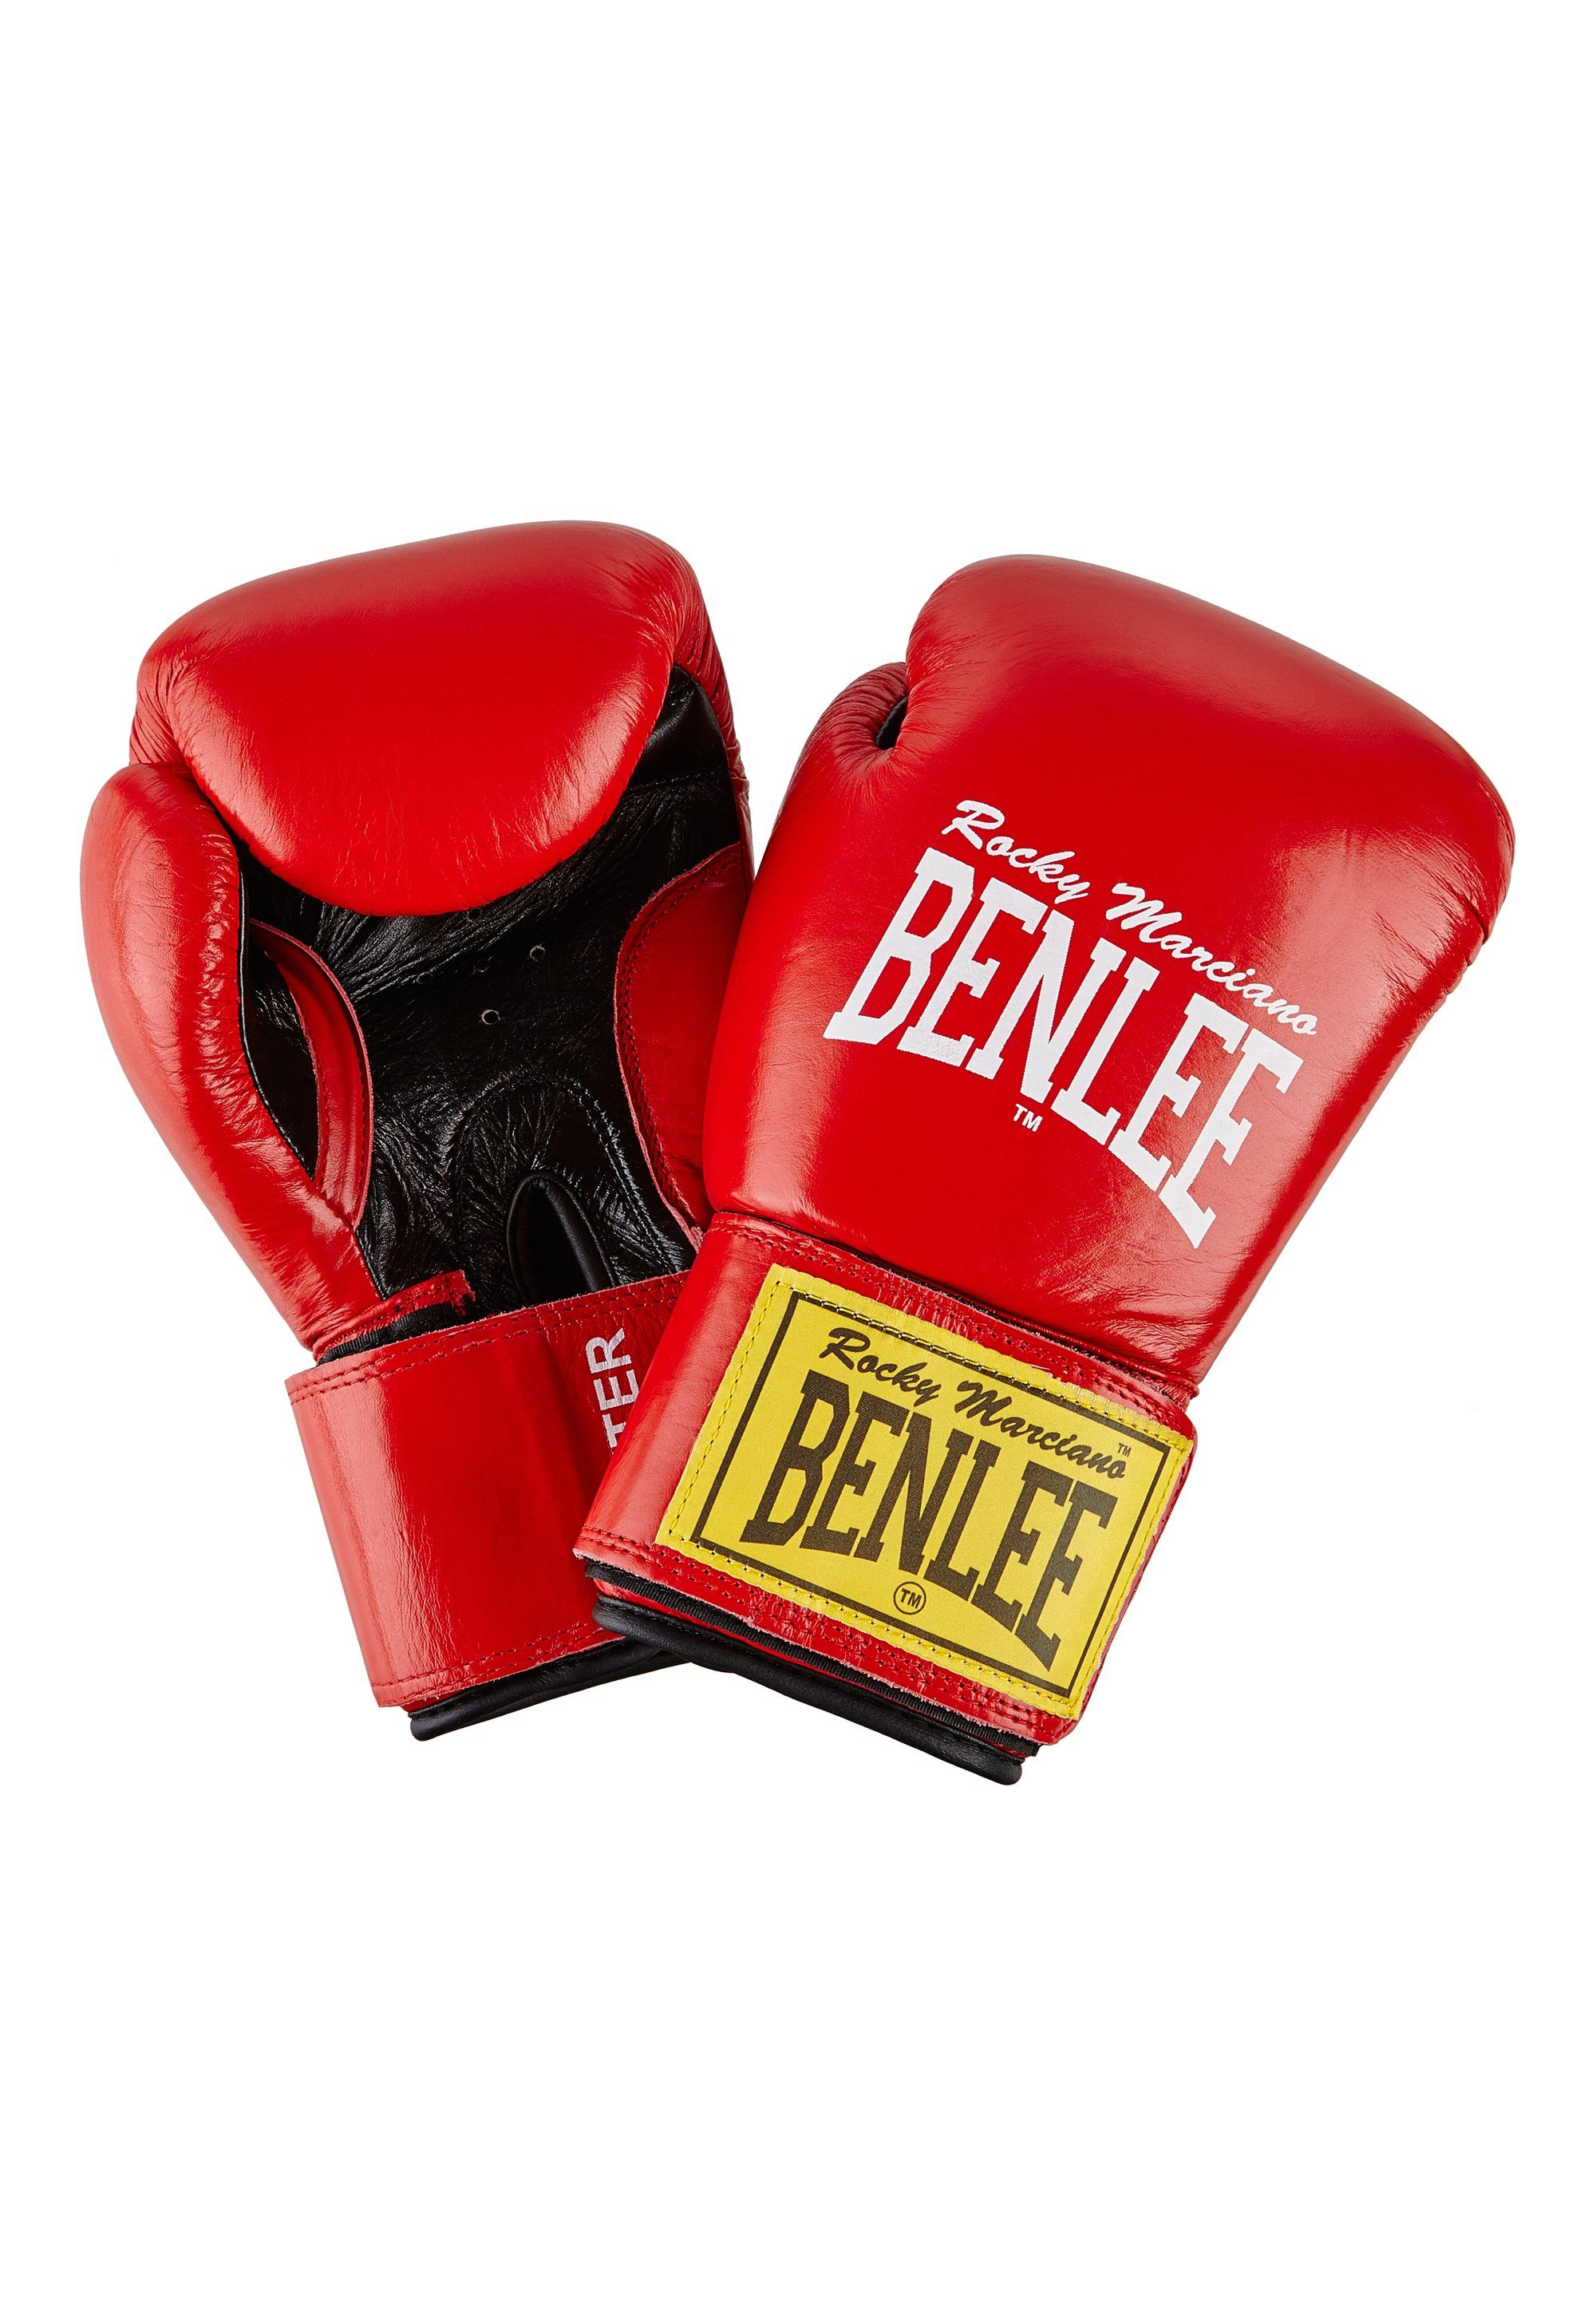 Boxhandschuhe FIGHTER Red/Black Marciano Benlee Rocky